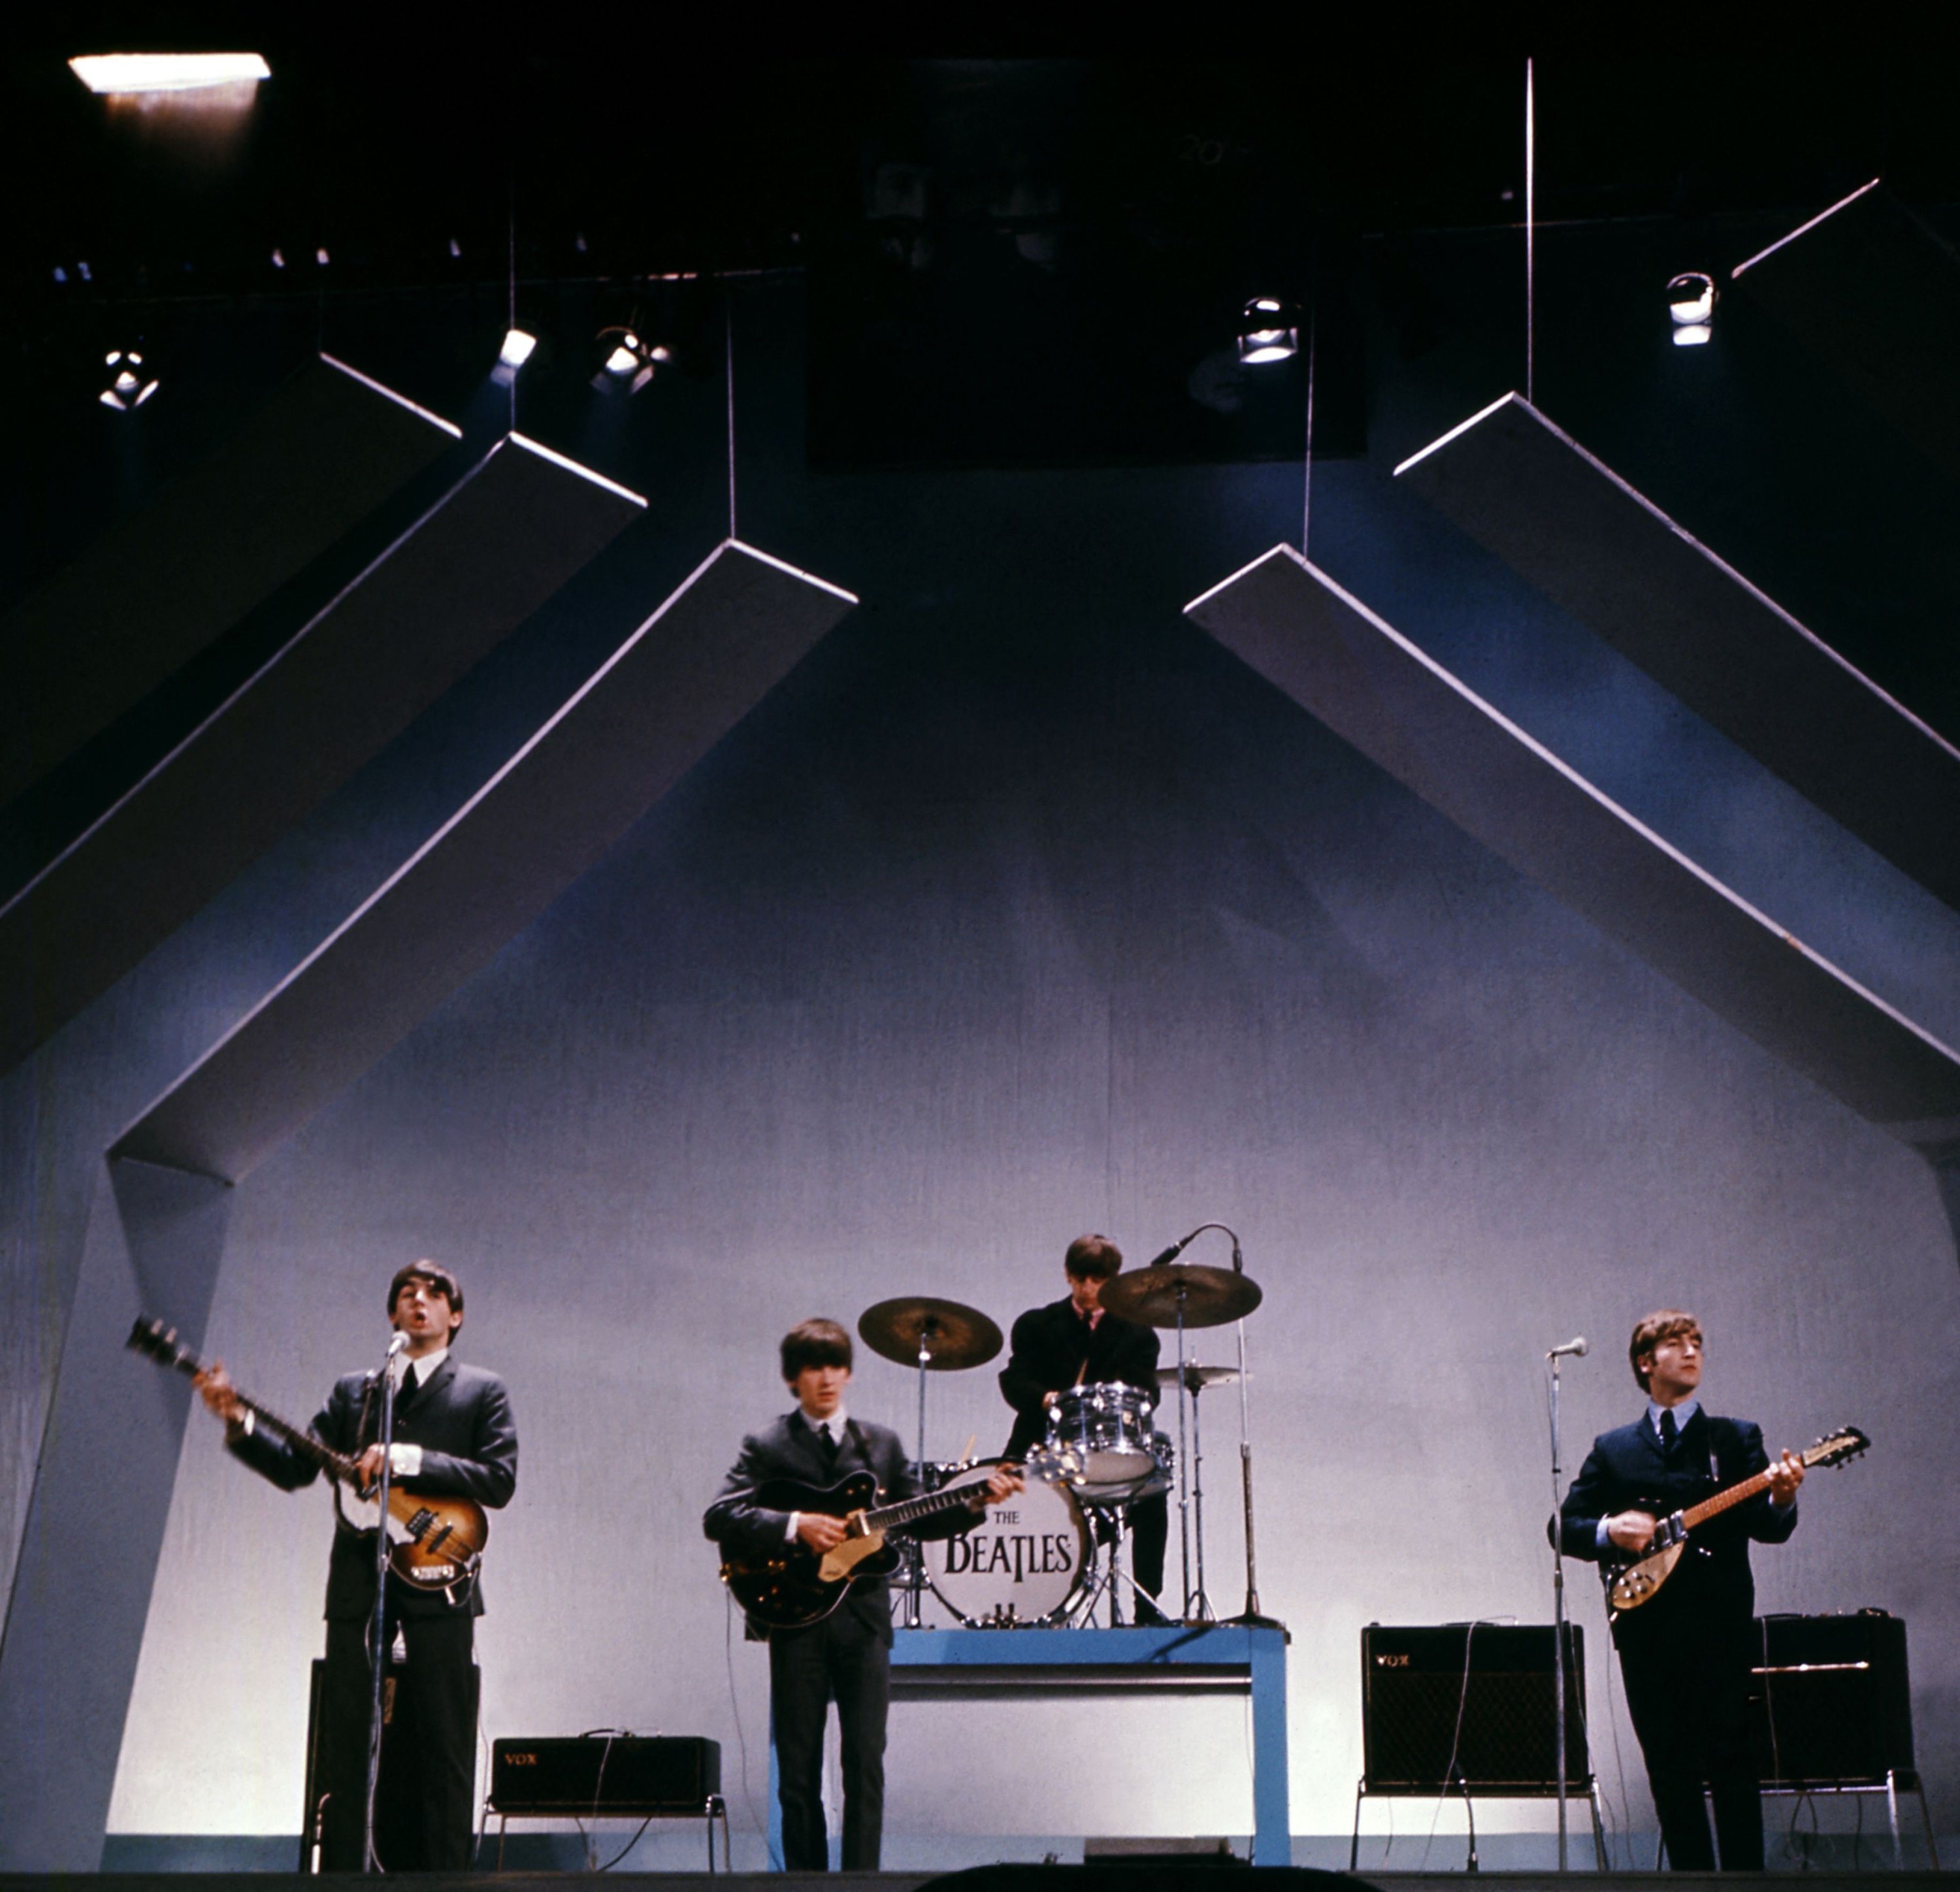 The Beatles (from L) Paul McCartney (bass), George Harrison (guitar), Ringo Starr (drums) and John Lennon (guitar) performing on stage during a concert in London, U.K., July 29, 1965. (AFP File Photo)